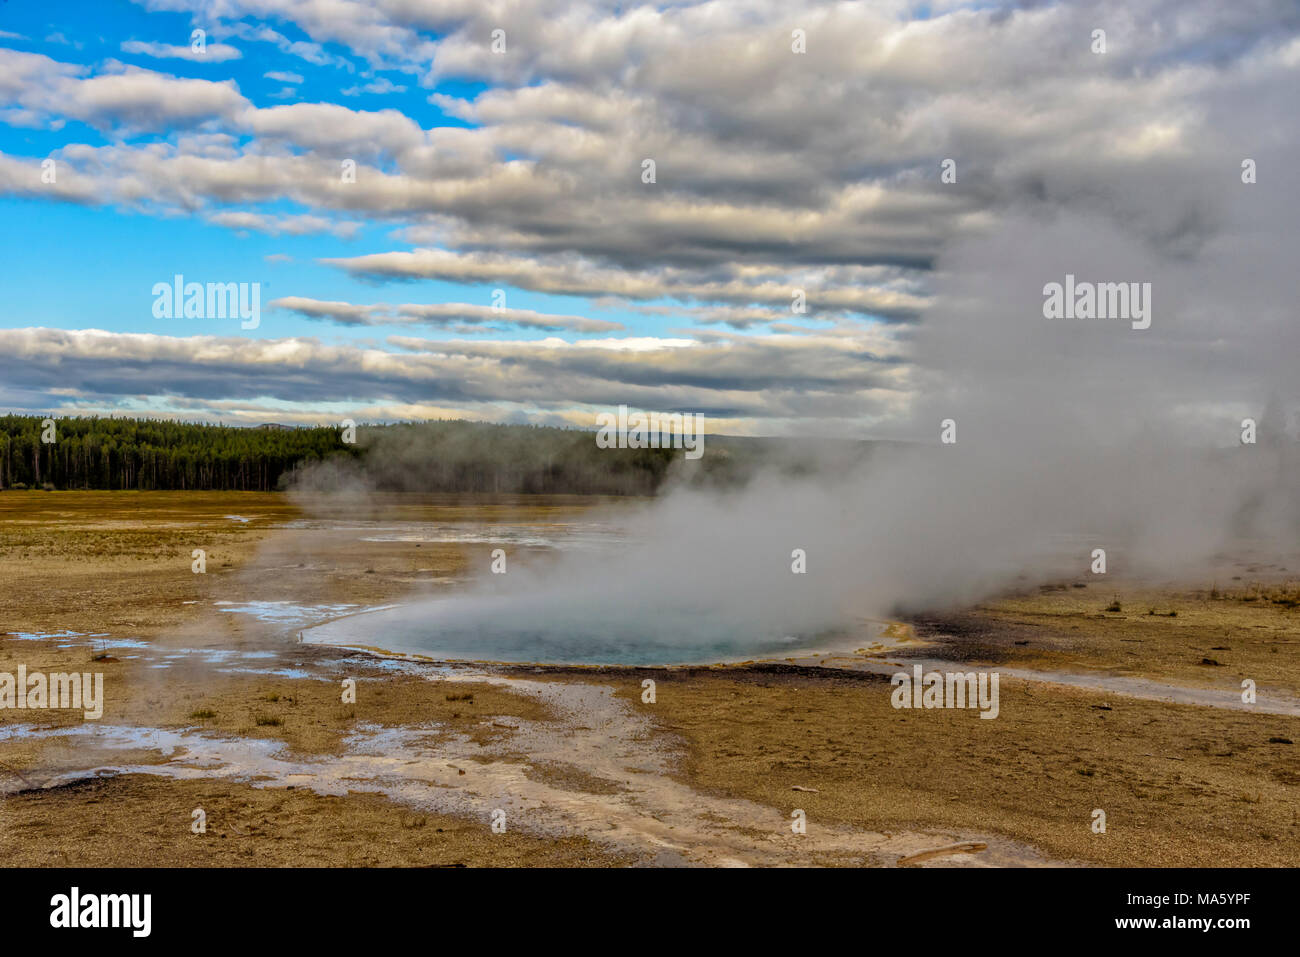 Hot spring with steam rising up off the water surrounded by dead grass, field with small streams and forest in background under blue sky with clouds. Stock Photo